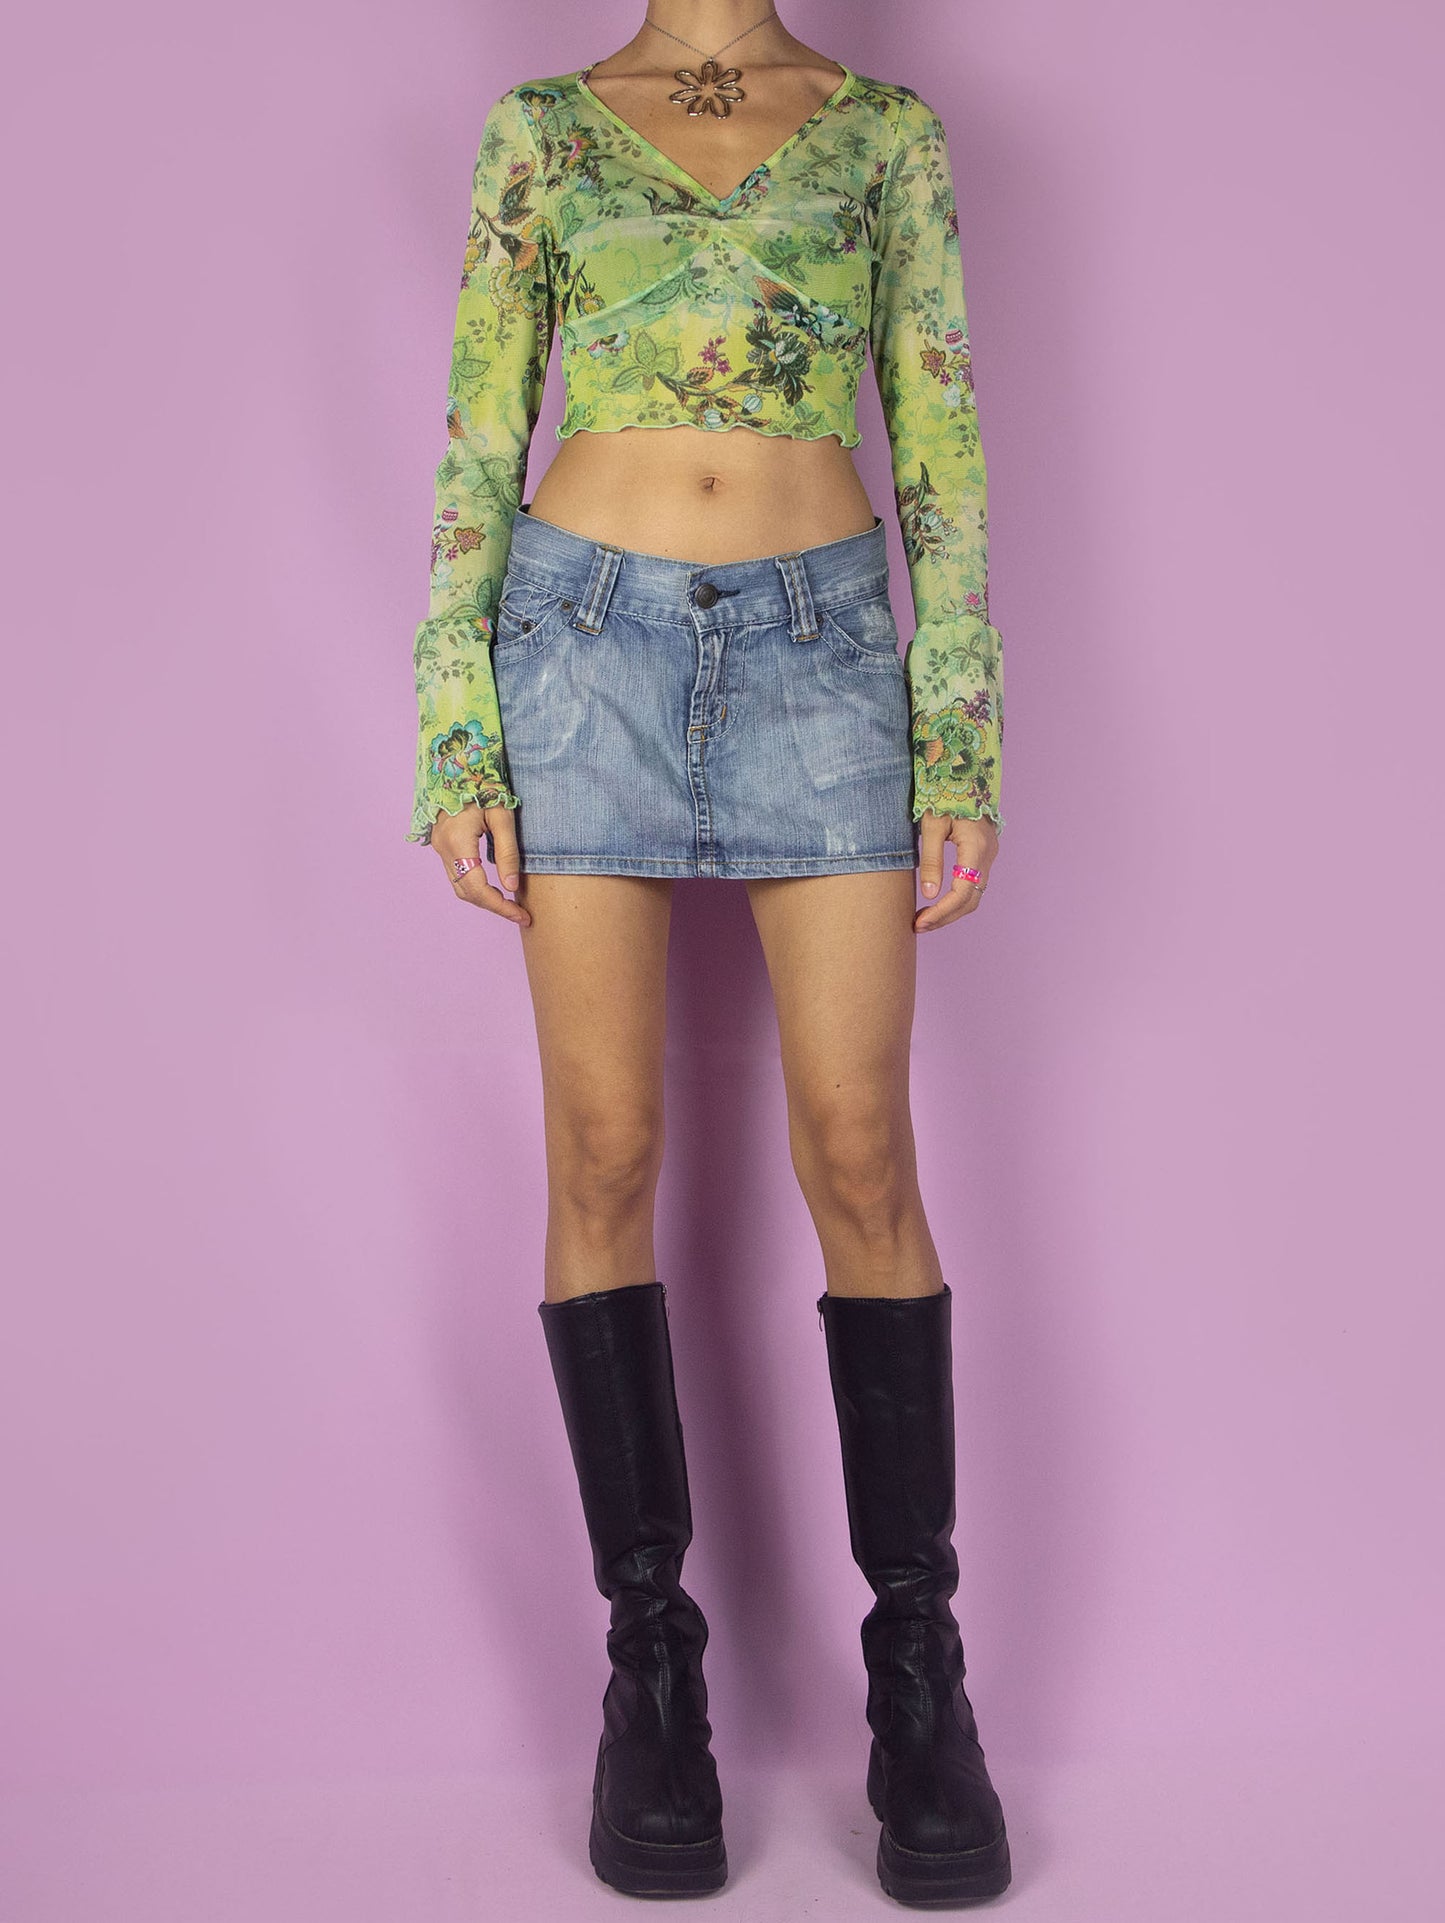 The Y2K Graphic Mesh Crop Top is a vintage bell-sleeved semi-sheer green shirt with an abstract floral pattern and a lettuce hem. Cyber fairy grunge 2000s printed top.